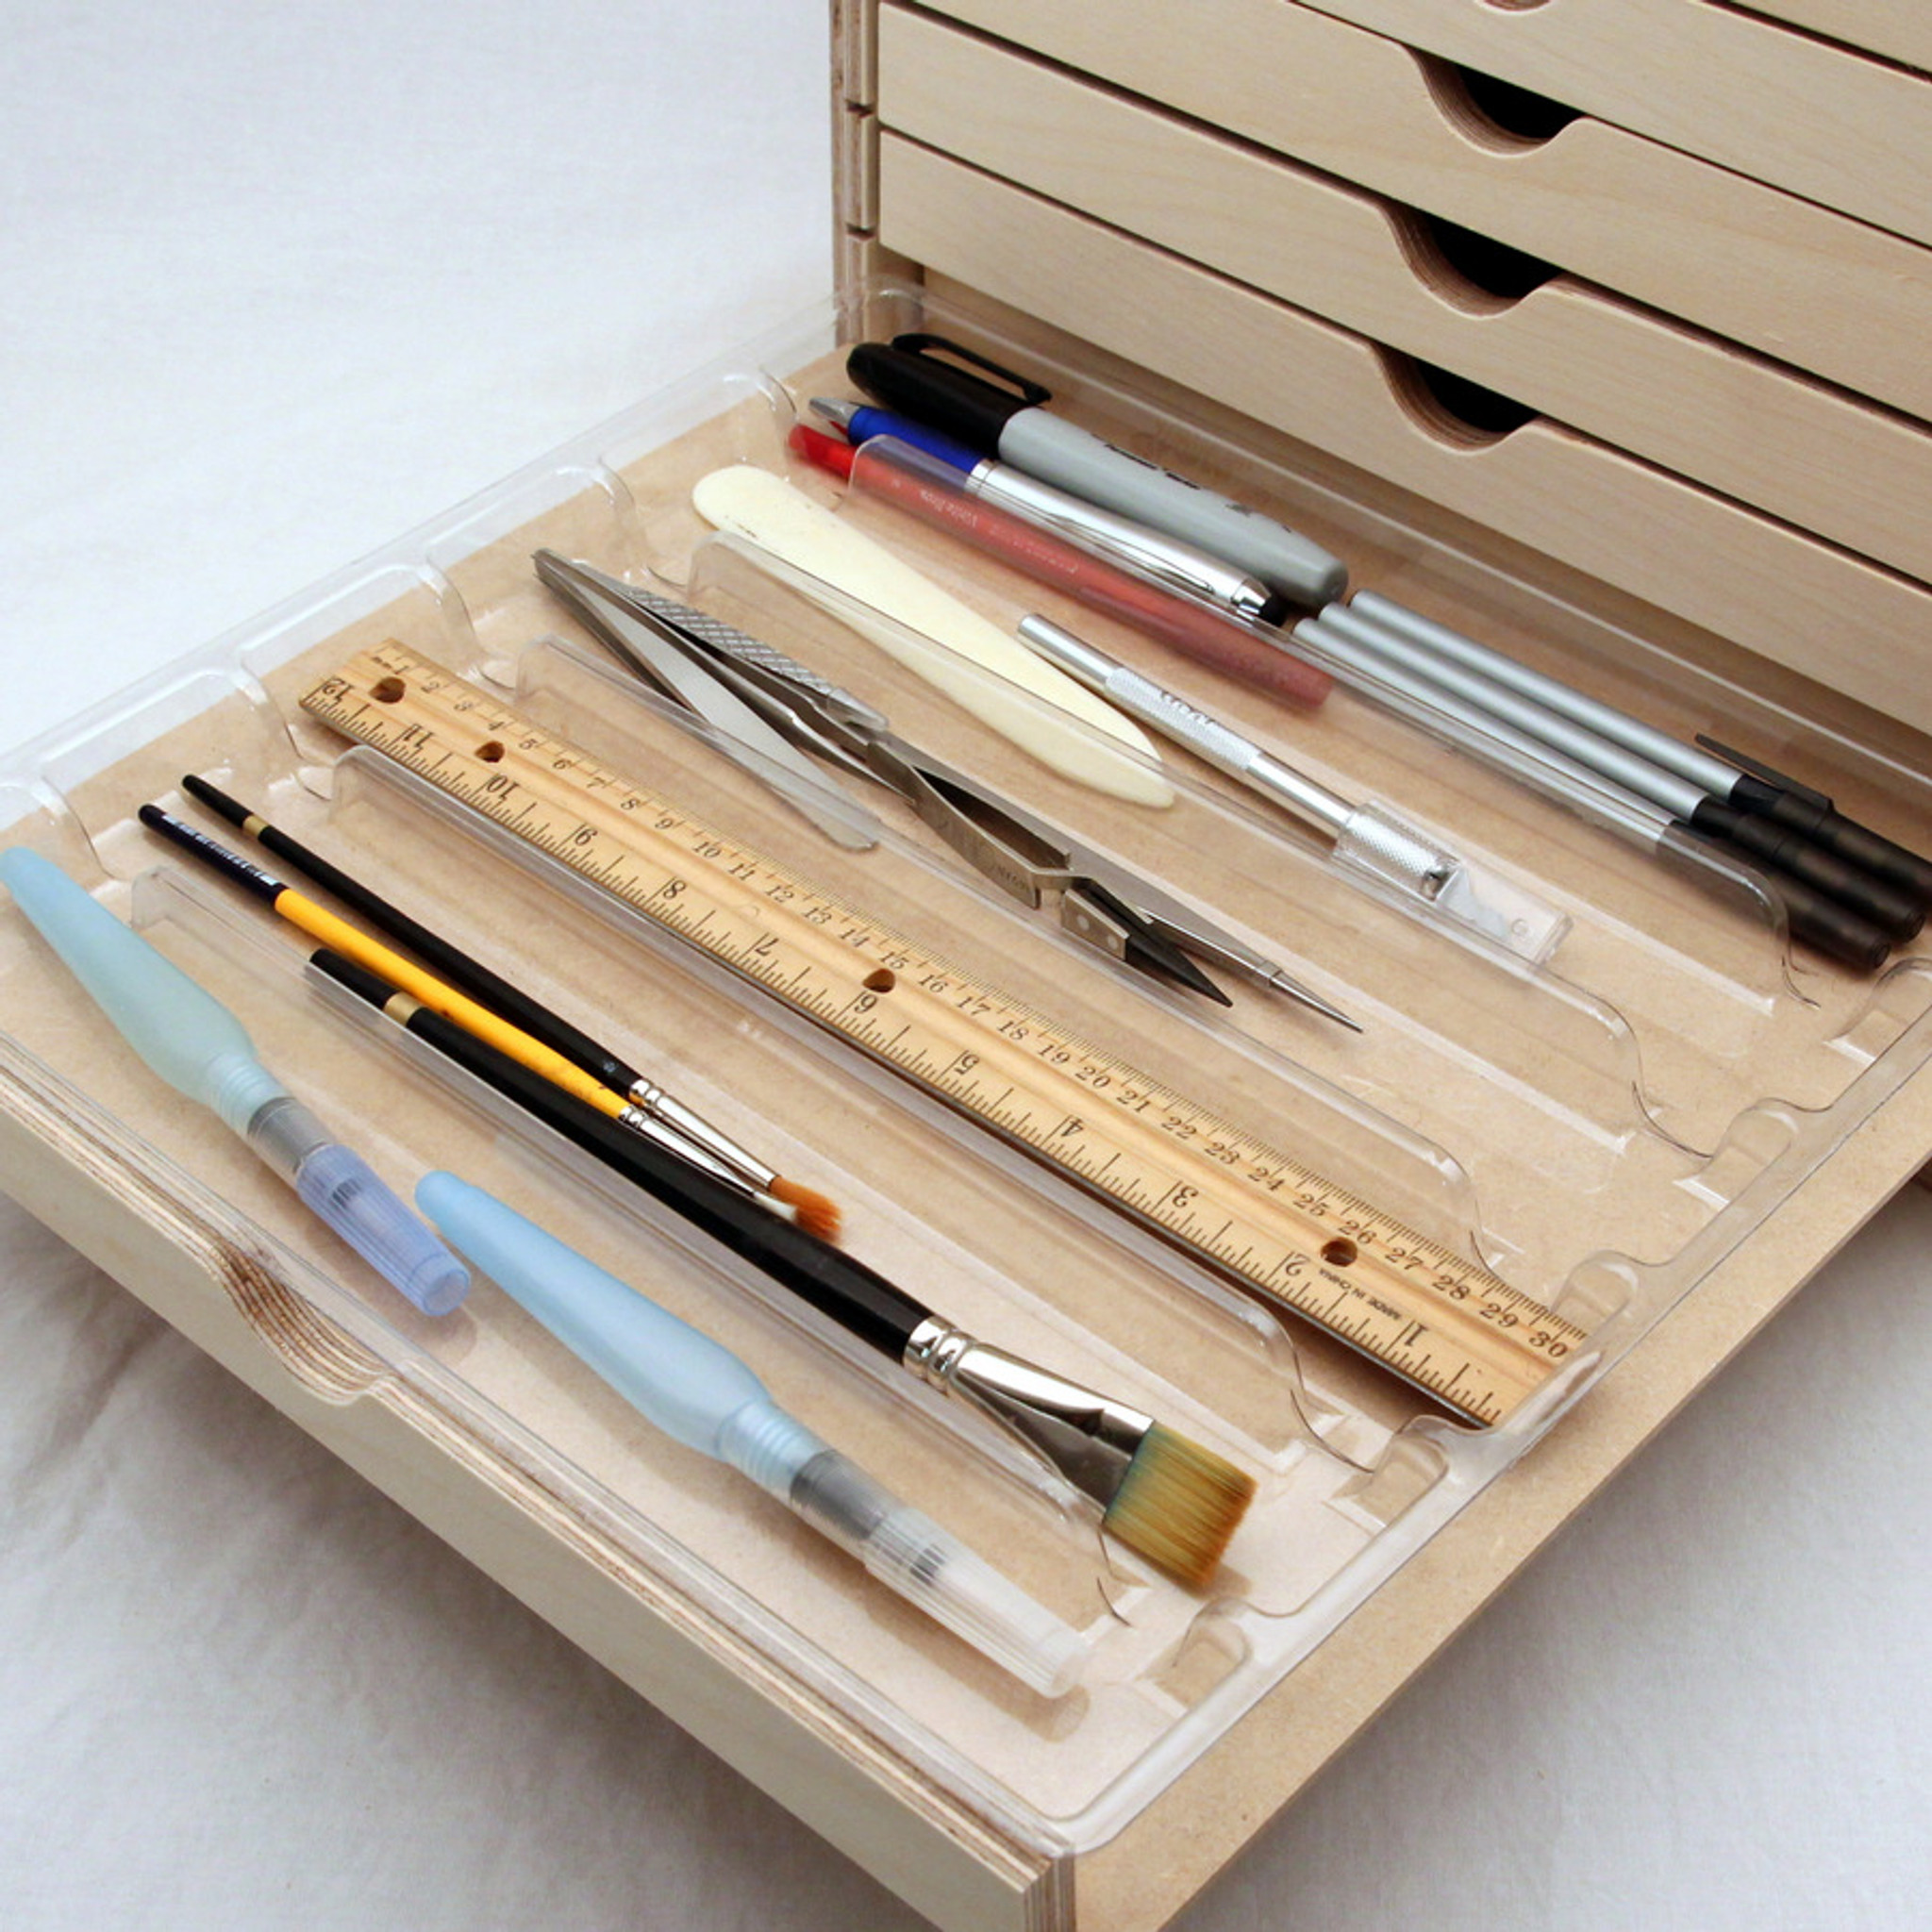 Craft Storage Box, Divided Compartment Storage Container, Craft Box, Bead  Storage, Stacking Bins, -  Israel